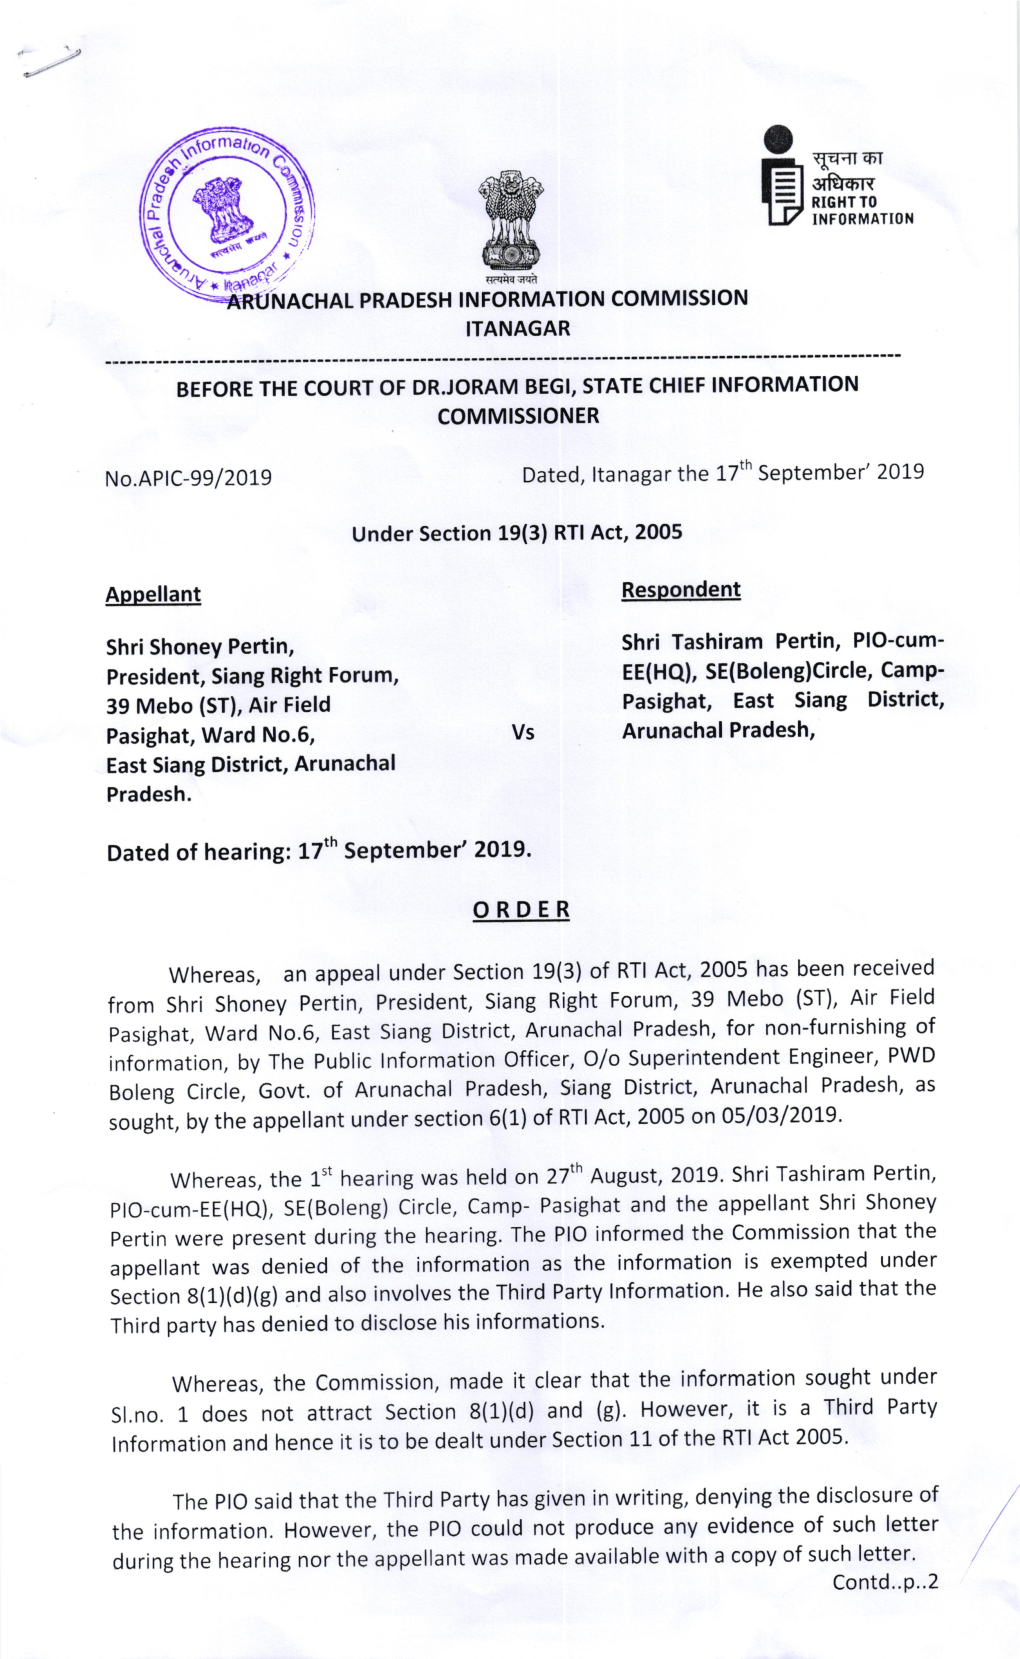 {Qqr6,R Pasighat, East Siang District, Appellant Was Denied of The